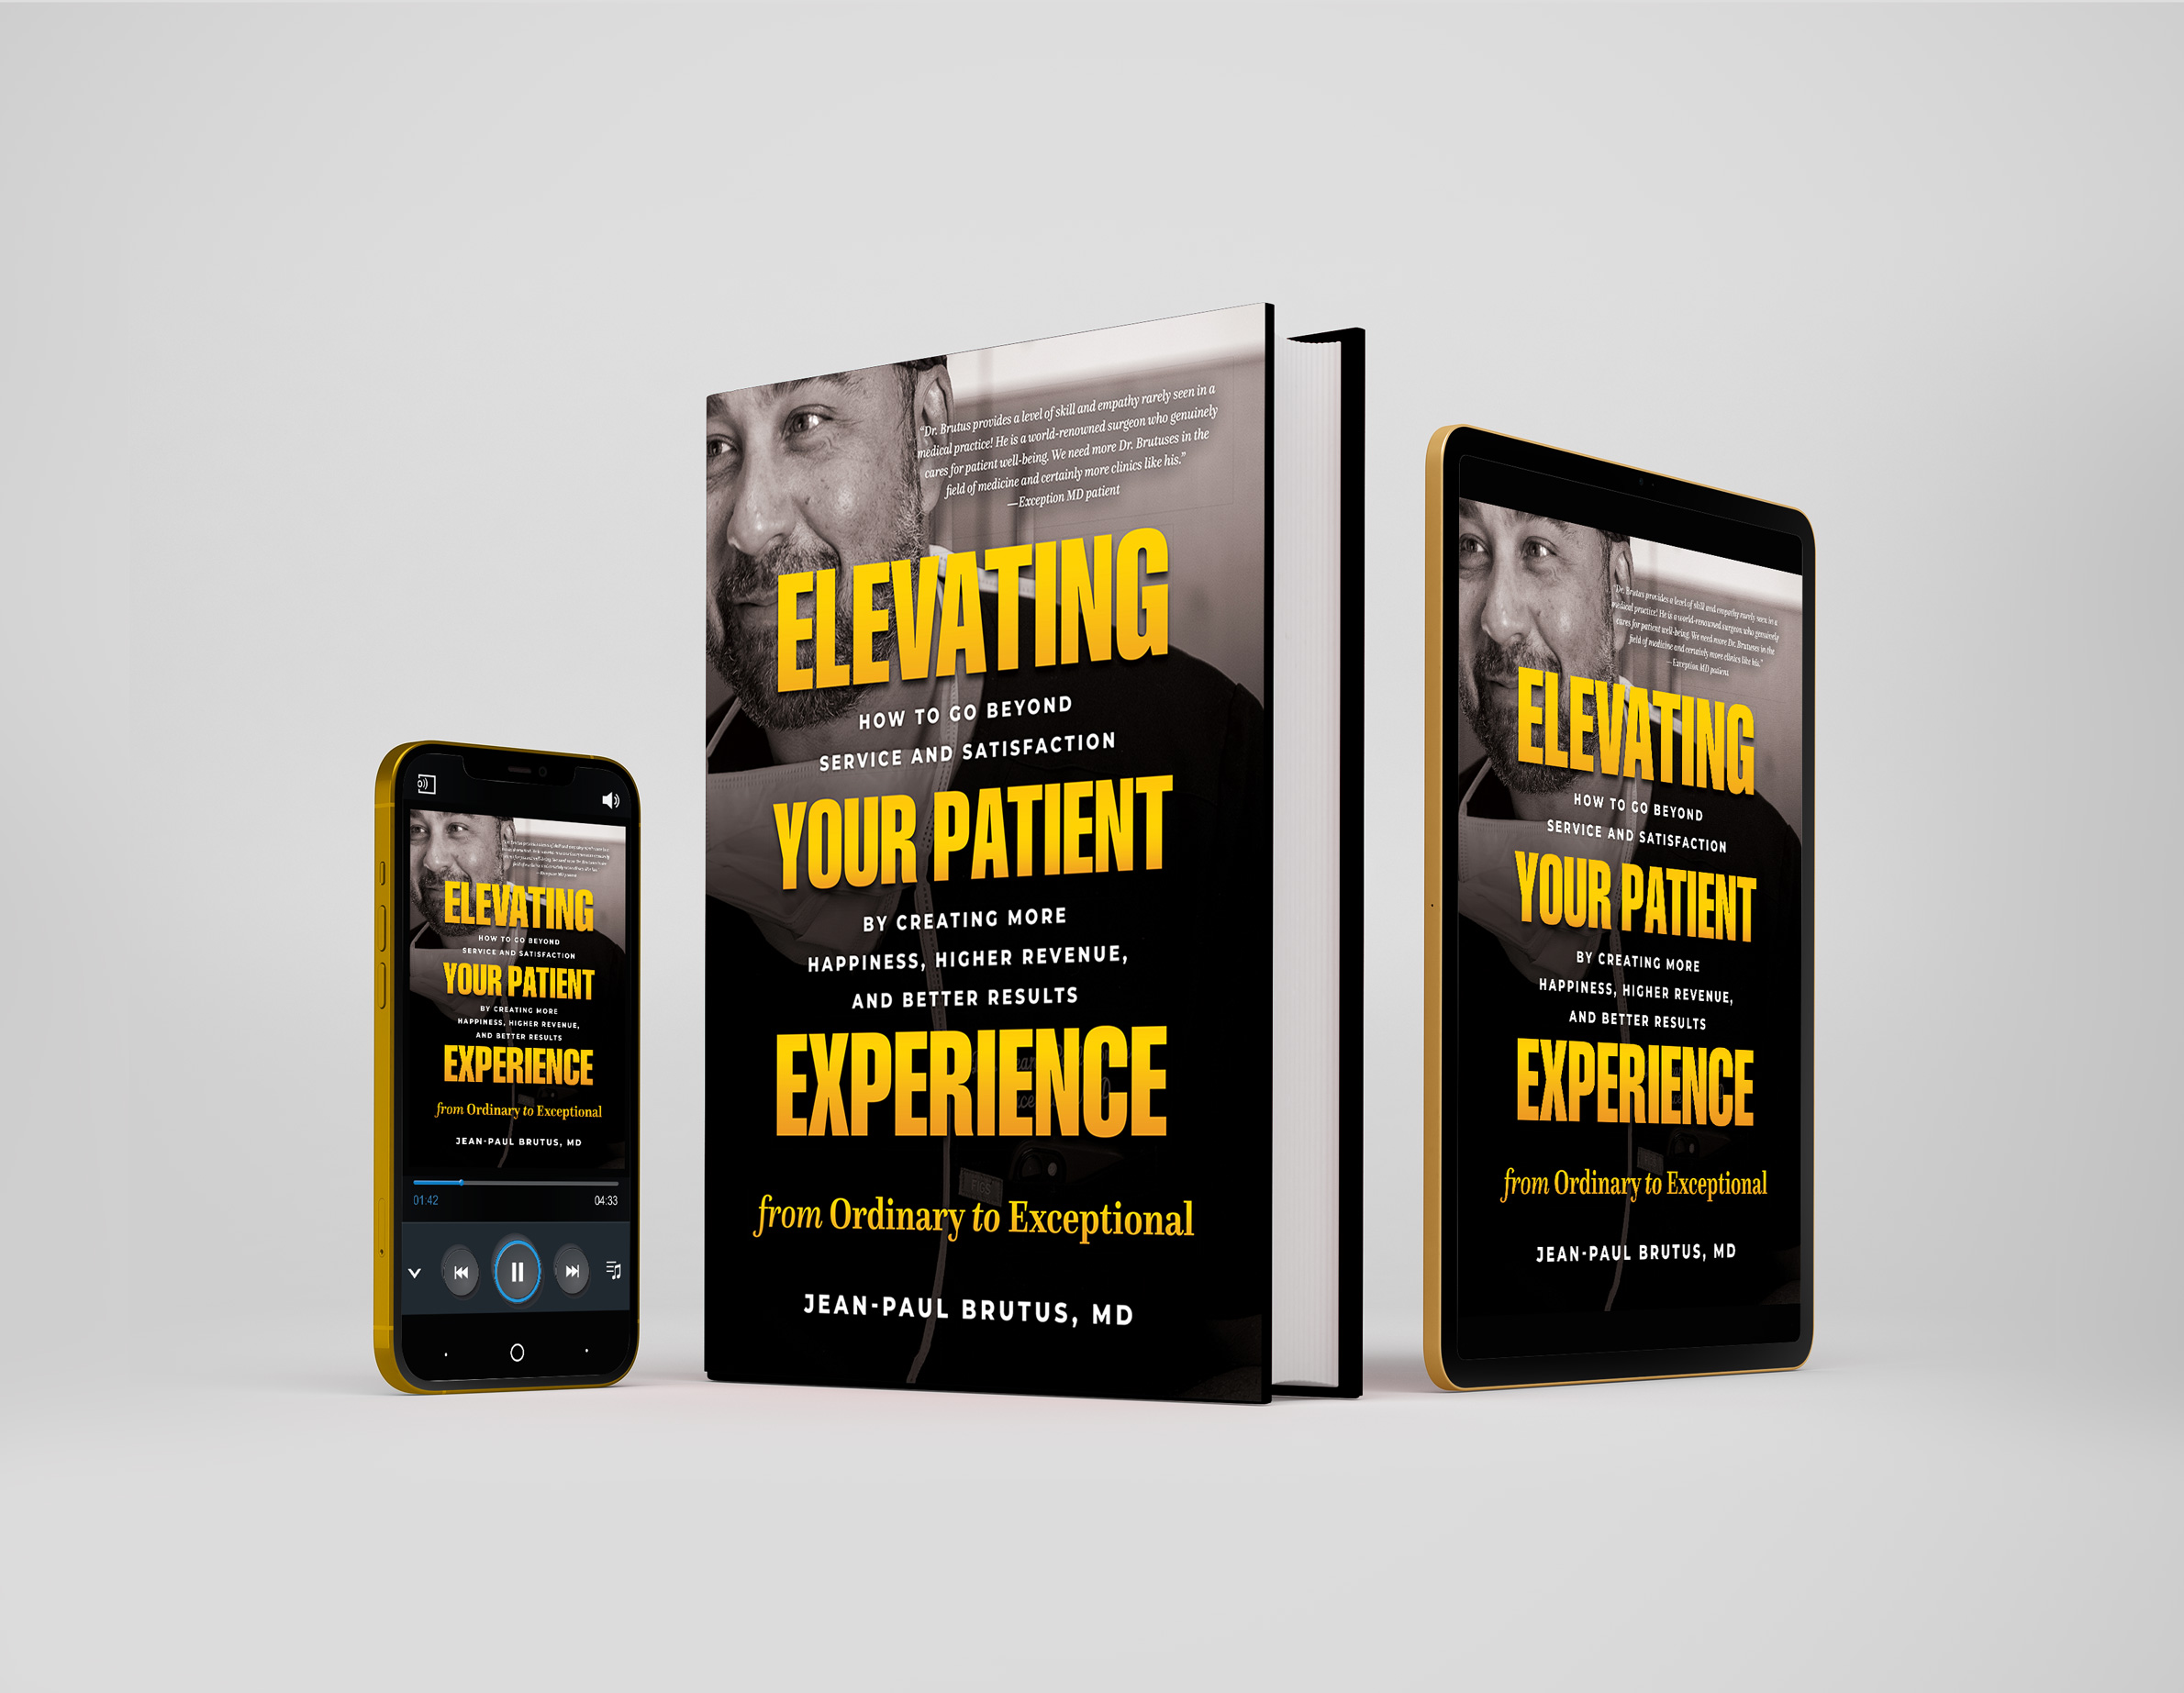 Full color workbook for improving patient experience